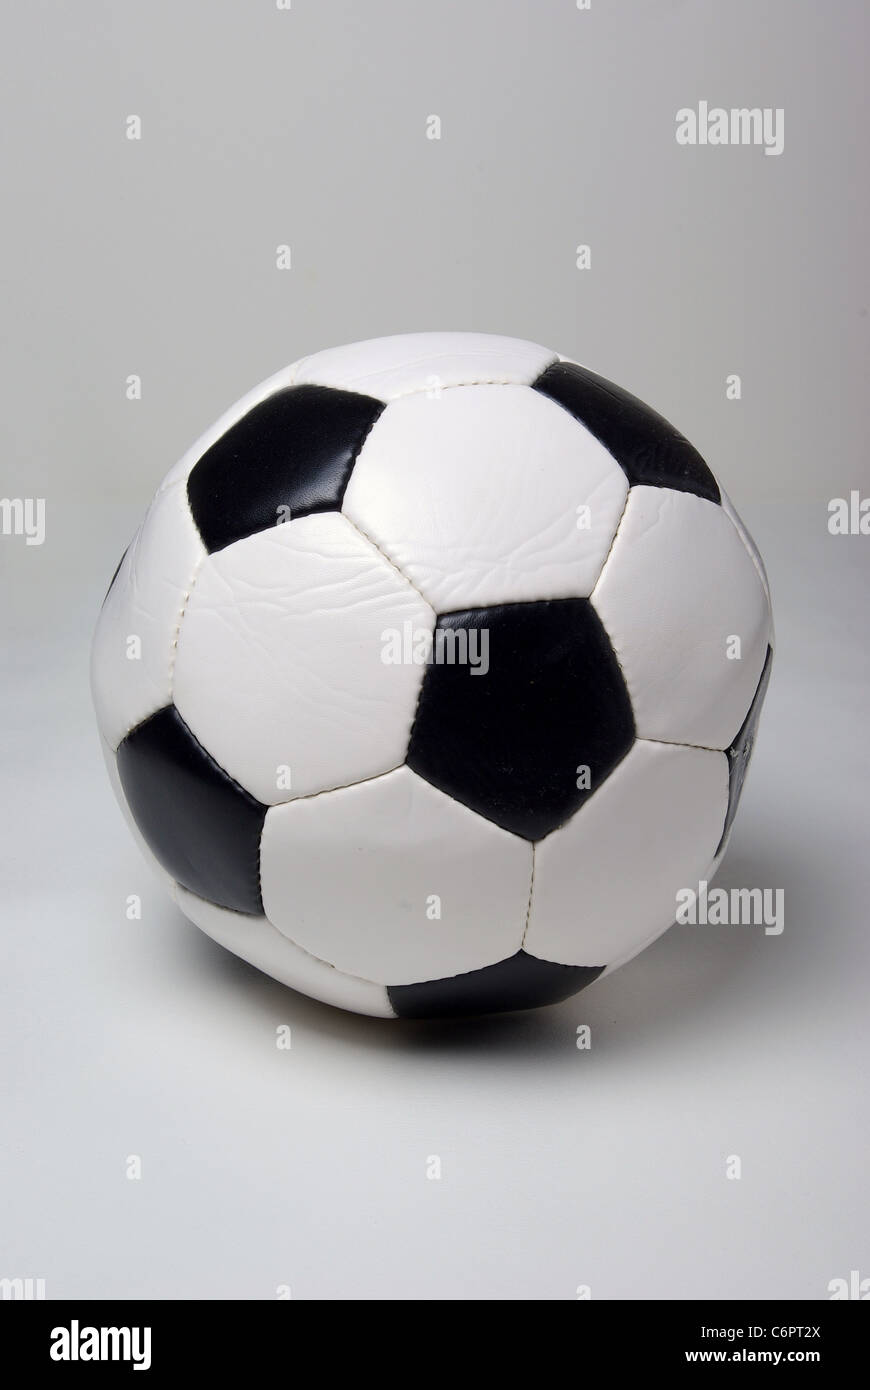 A soccer ball sits on a plain white background. Stock Photo